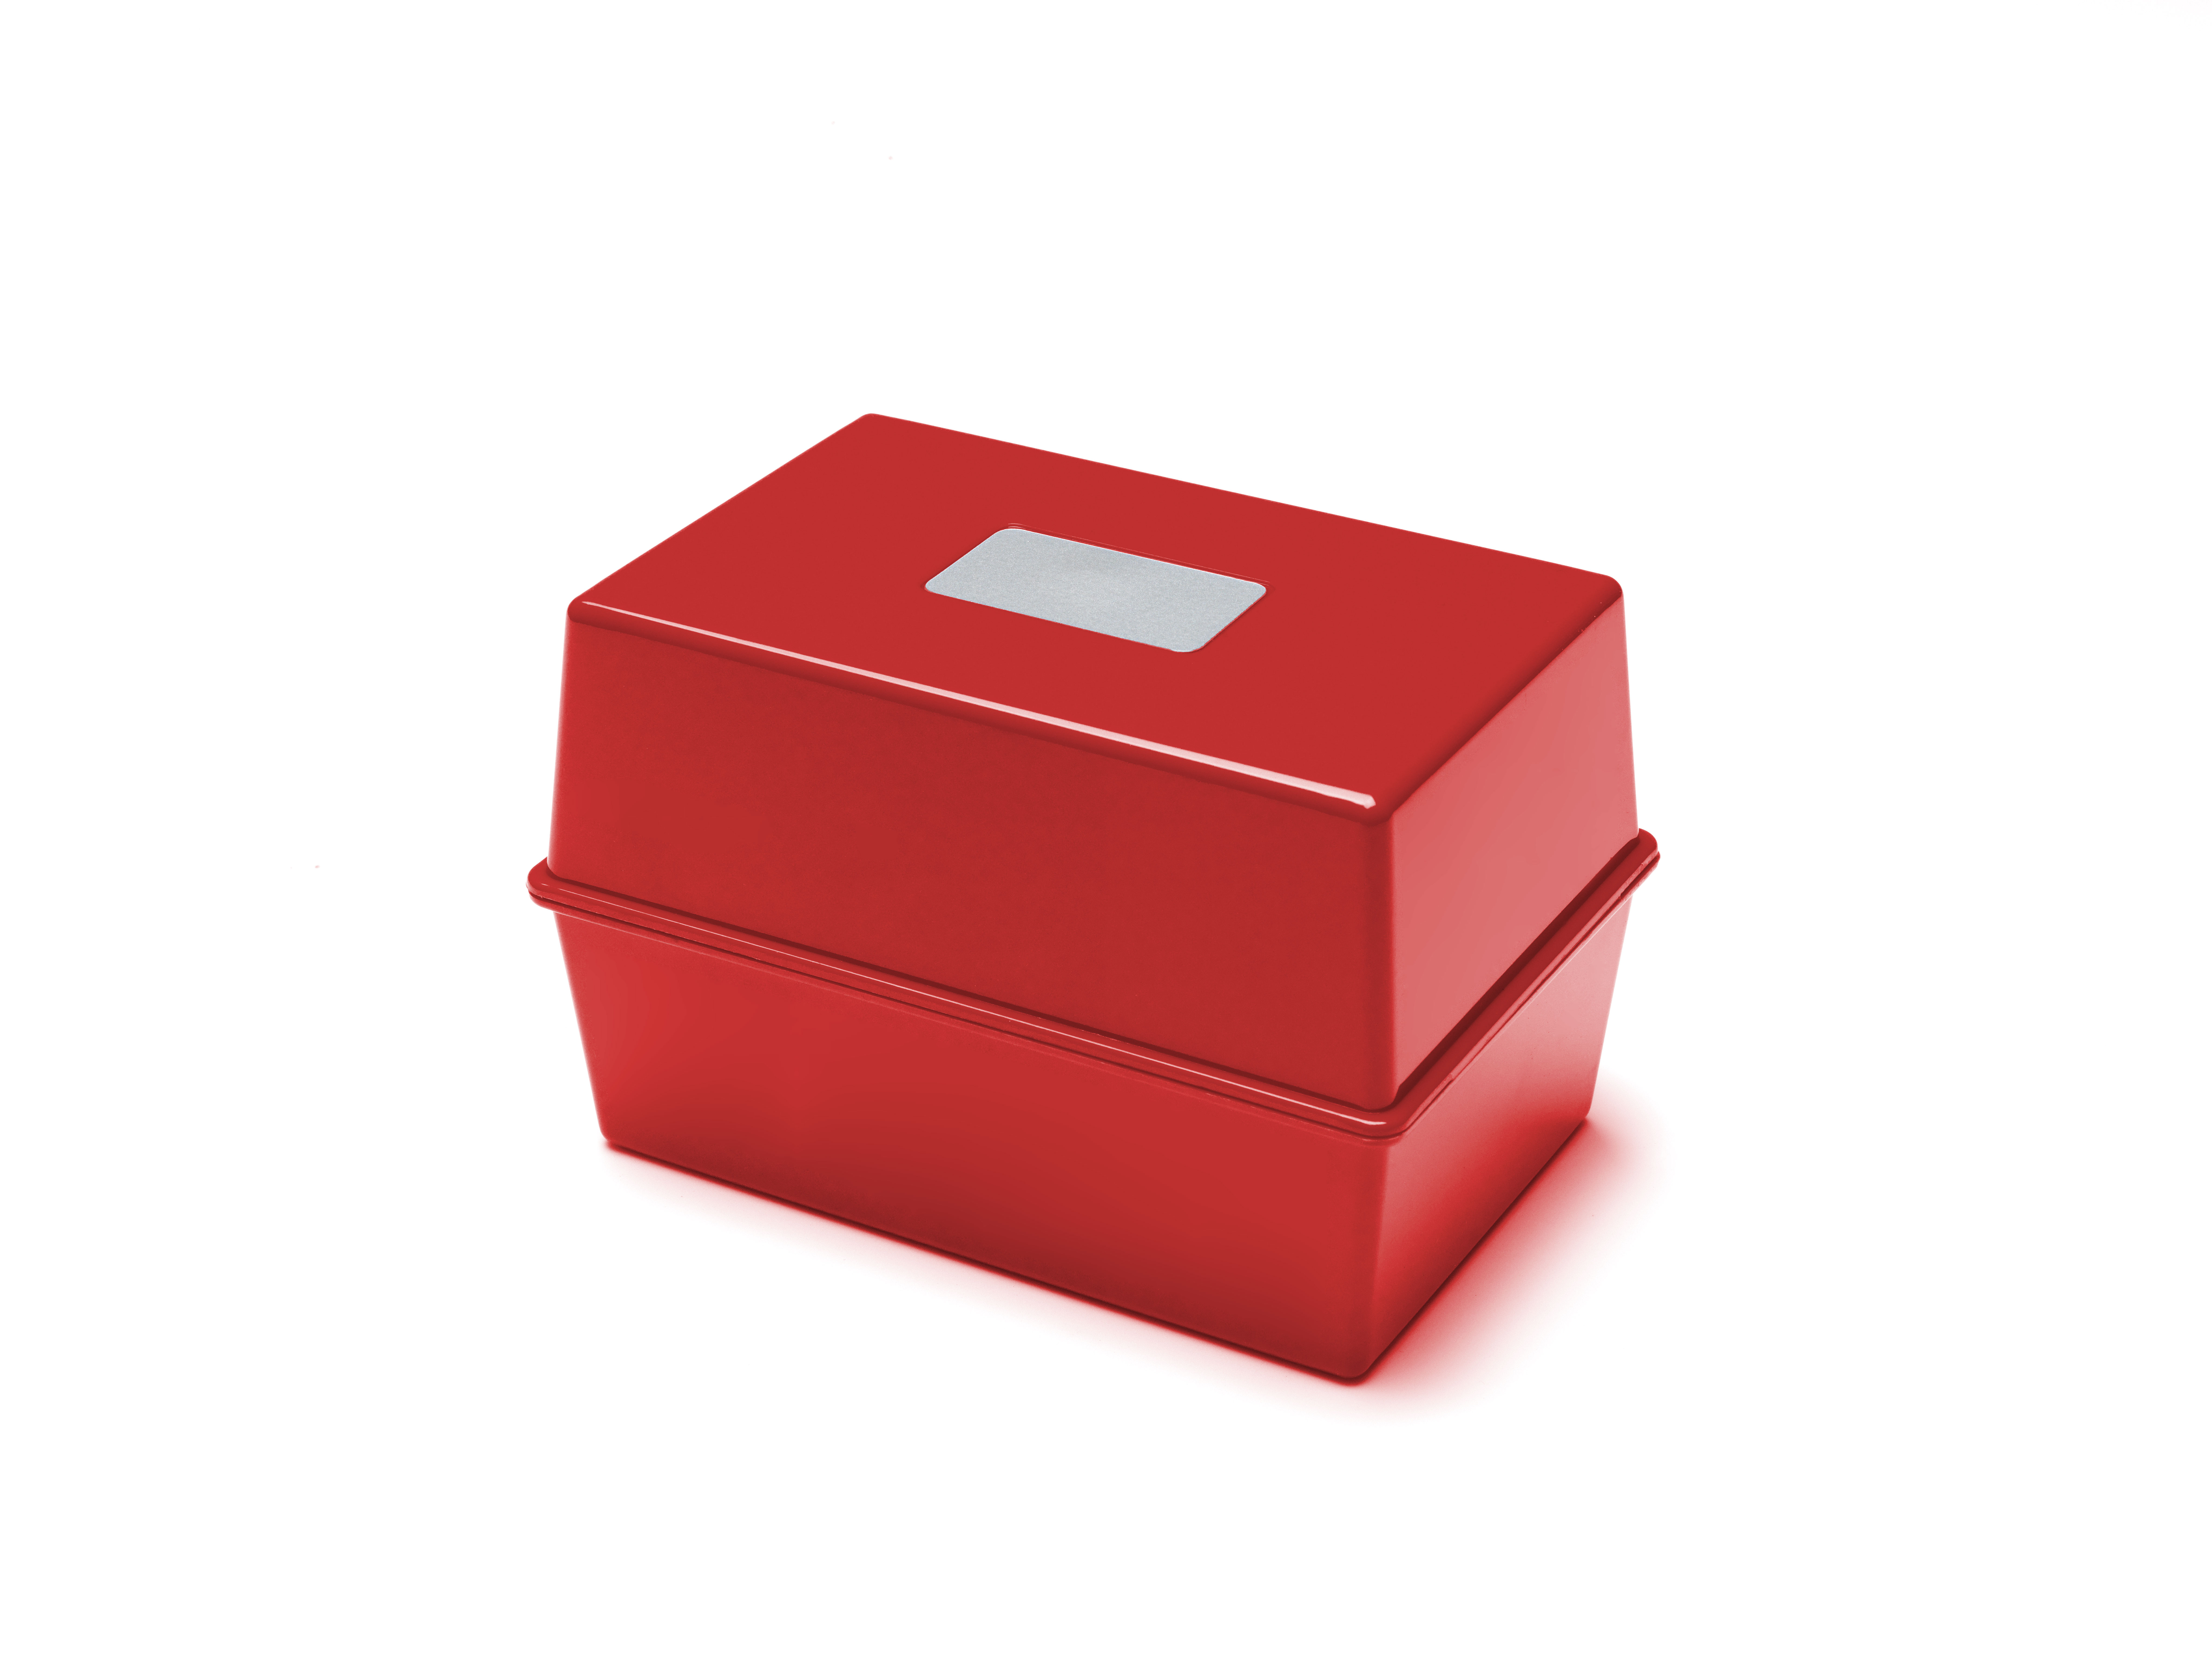 Storage ValueX Deflecto Card Index Box 6x4 inches / 152x102mm Red